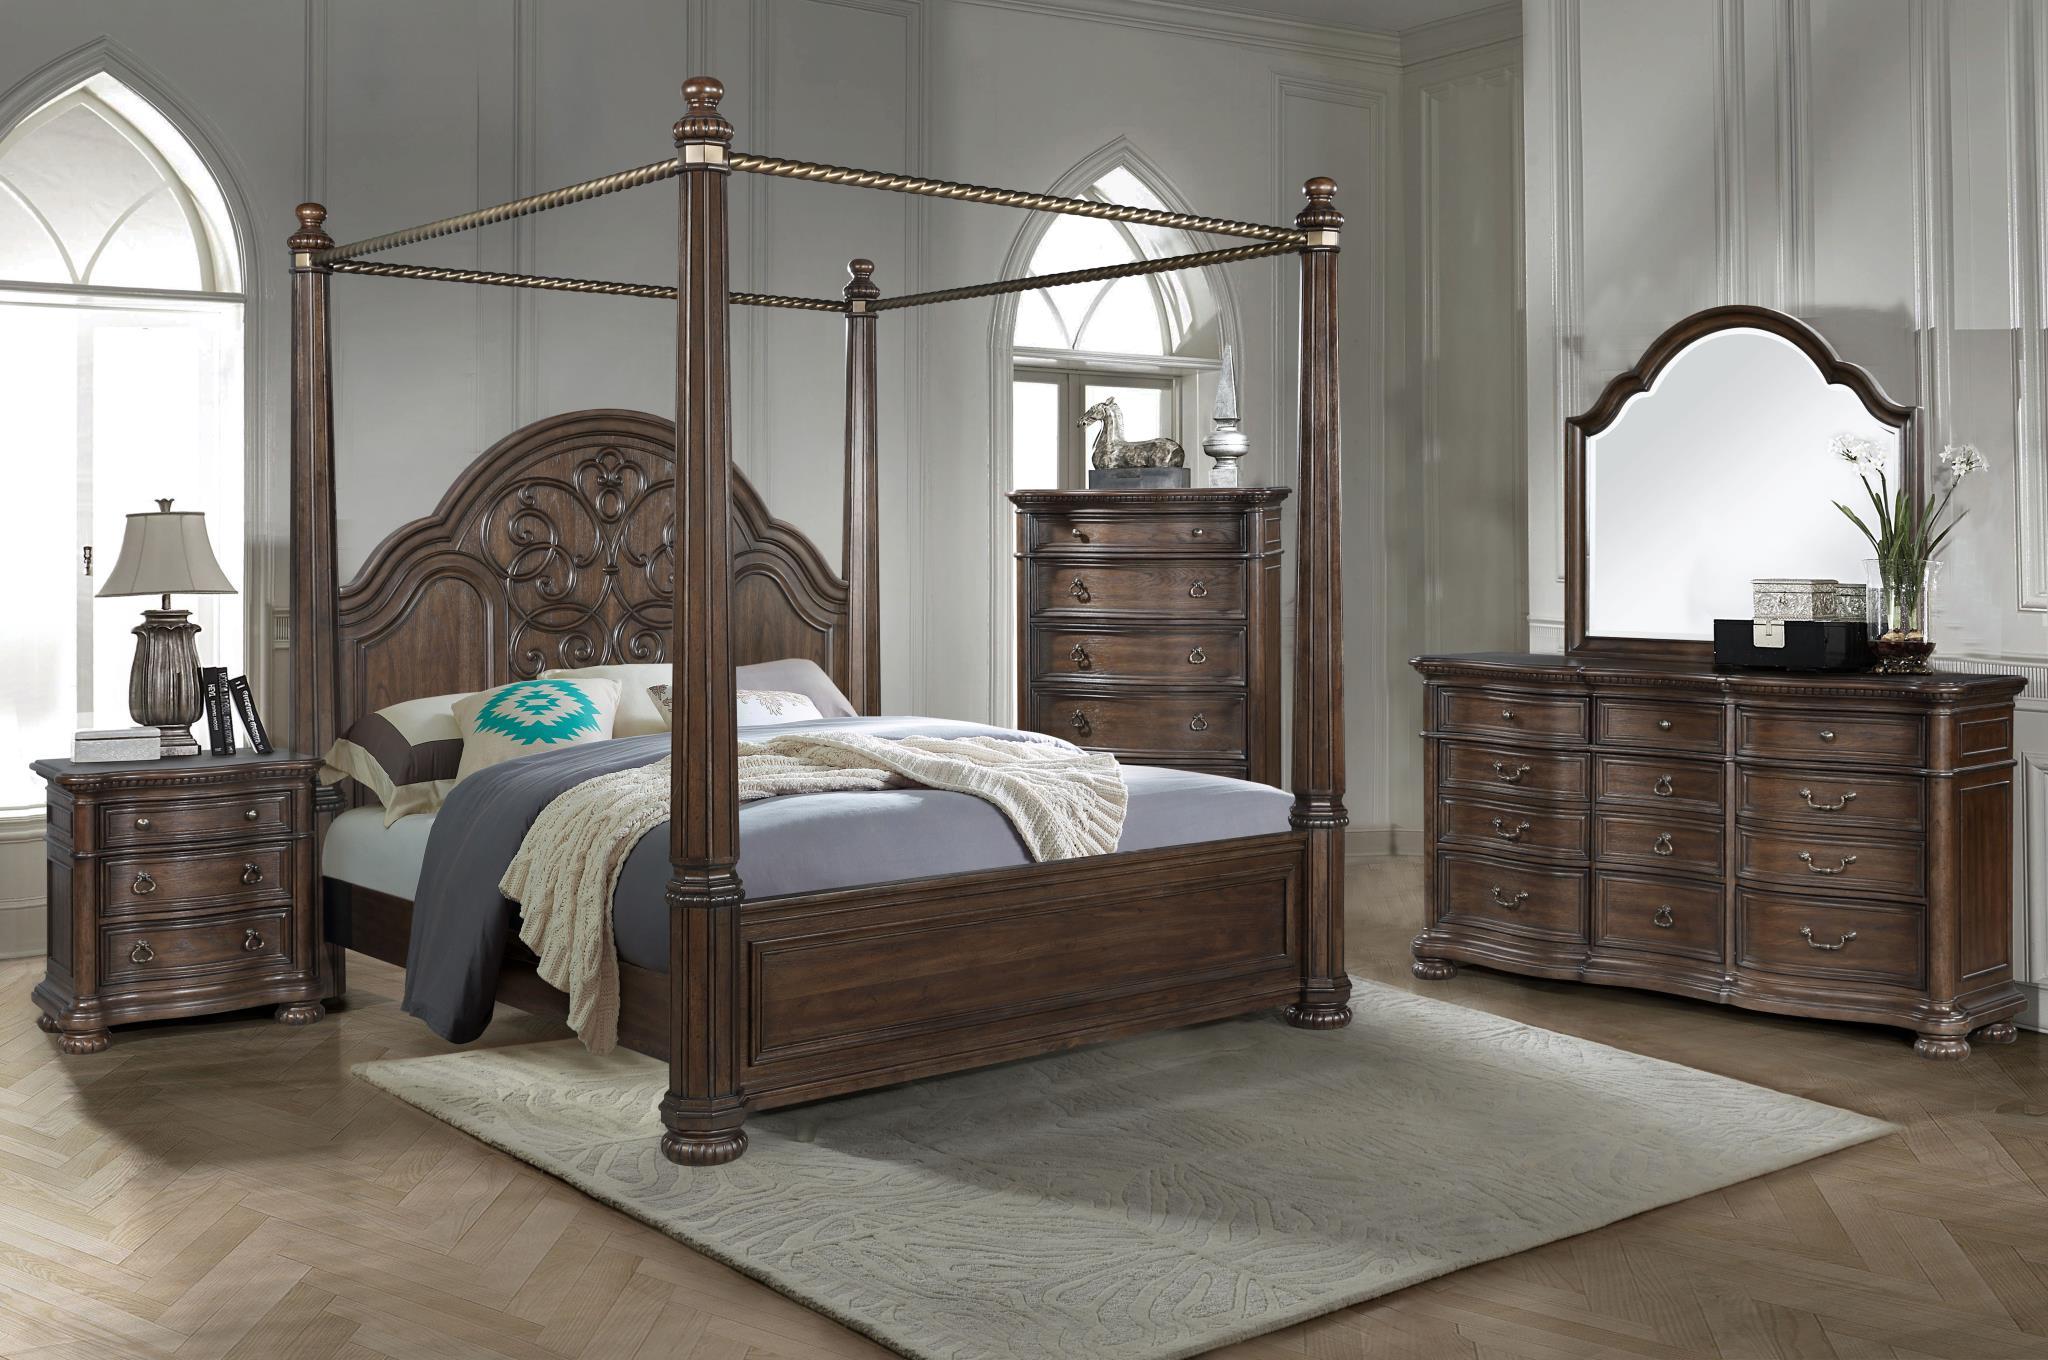 Contemporary, Traditional Canopy Bedroom Set TUSCANY 321-113-Set-5 321-113-2NDM-5PC in Brown 